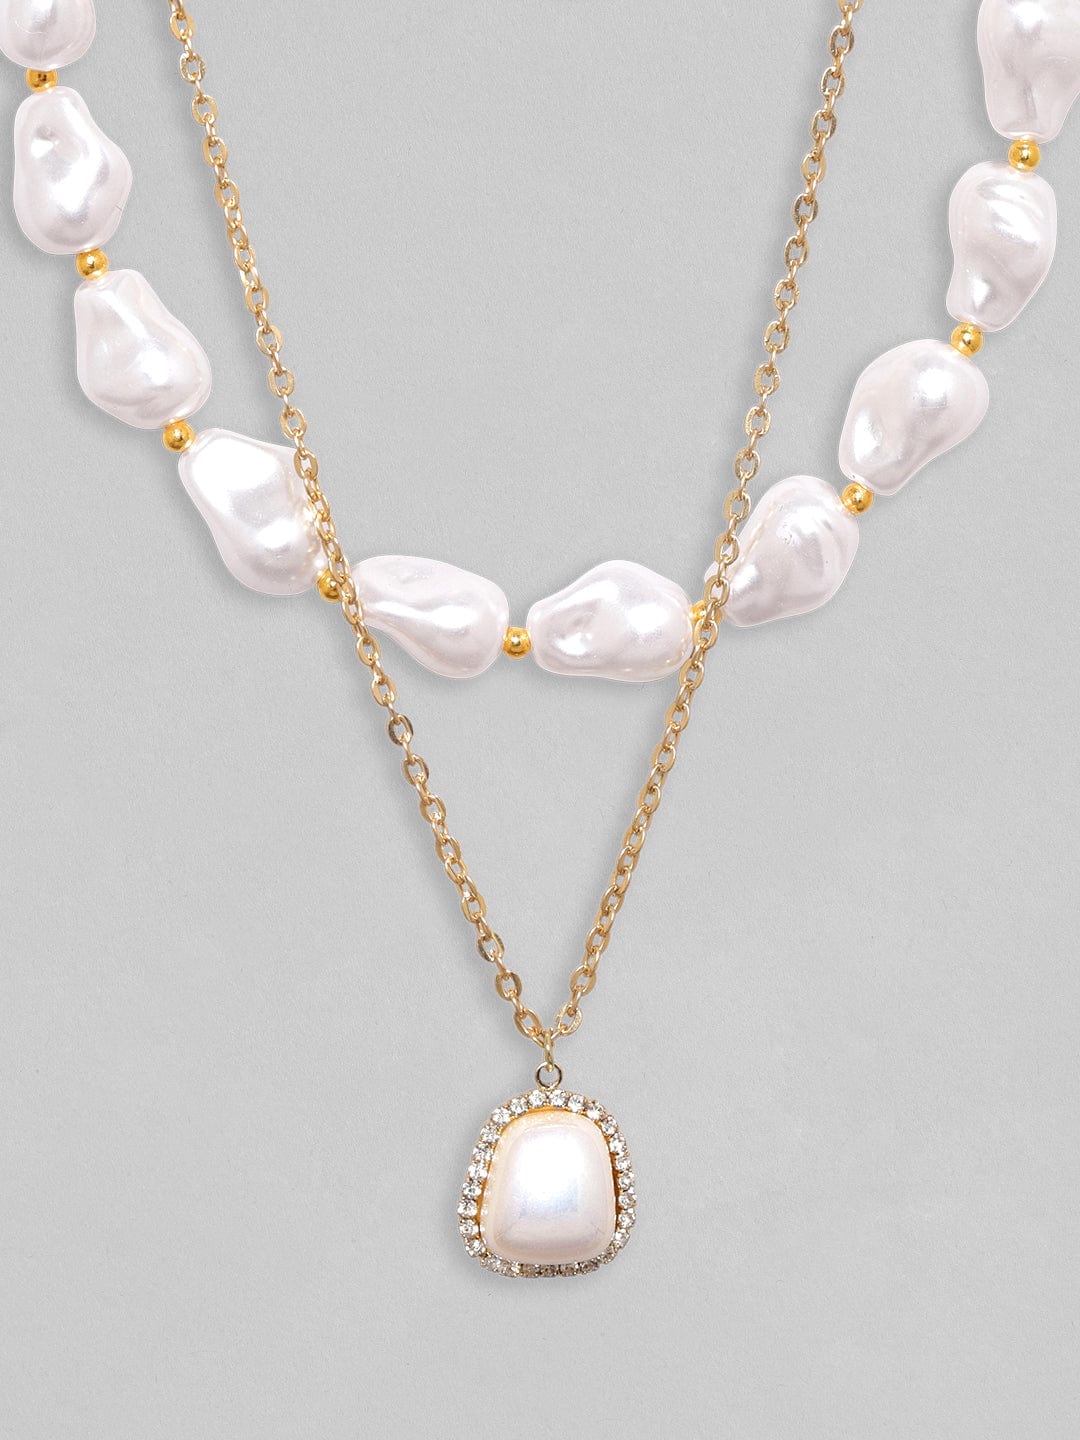 Rubans Voguish Gold-Toned &amp; White Brass Gold-Plated Layered Necklace Chain &amp; Necklaces